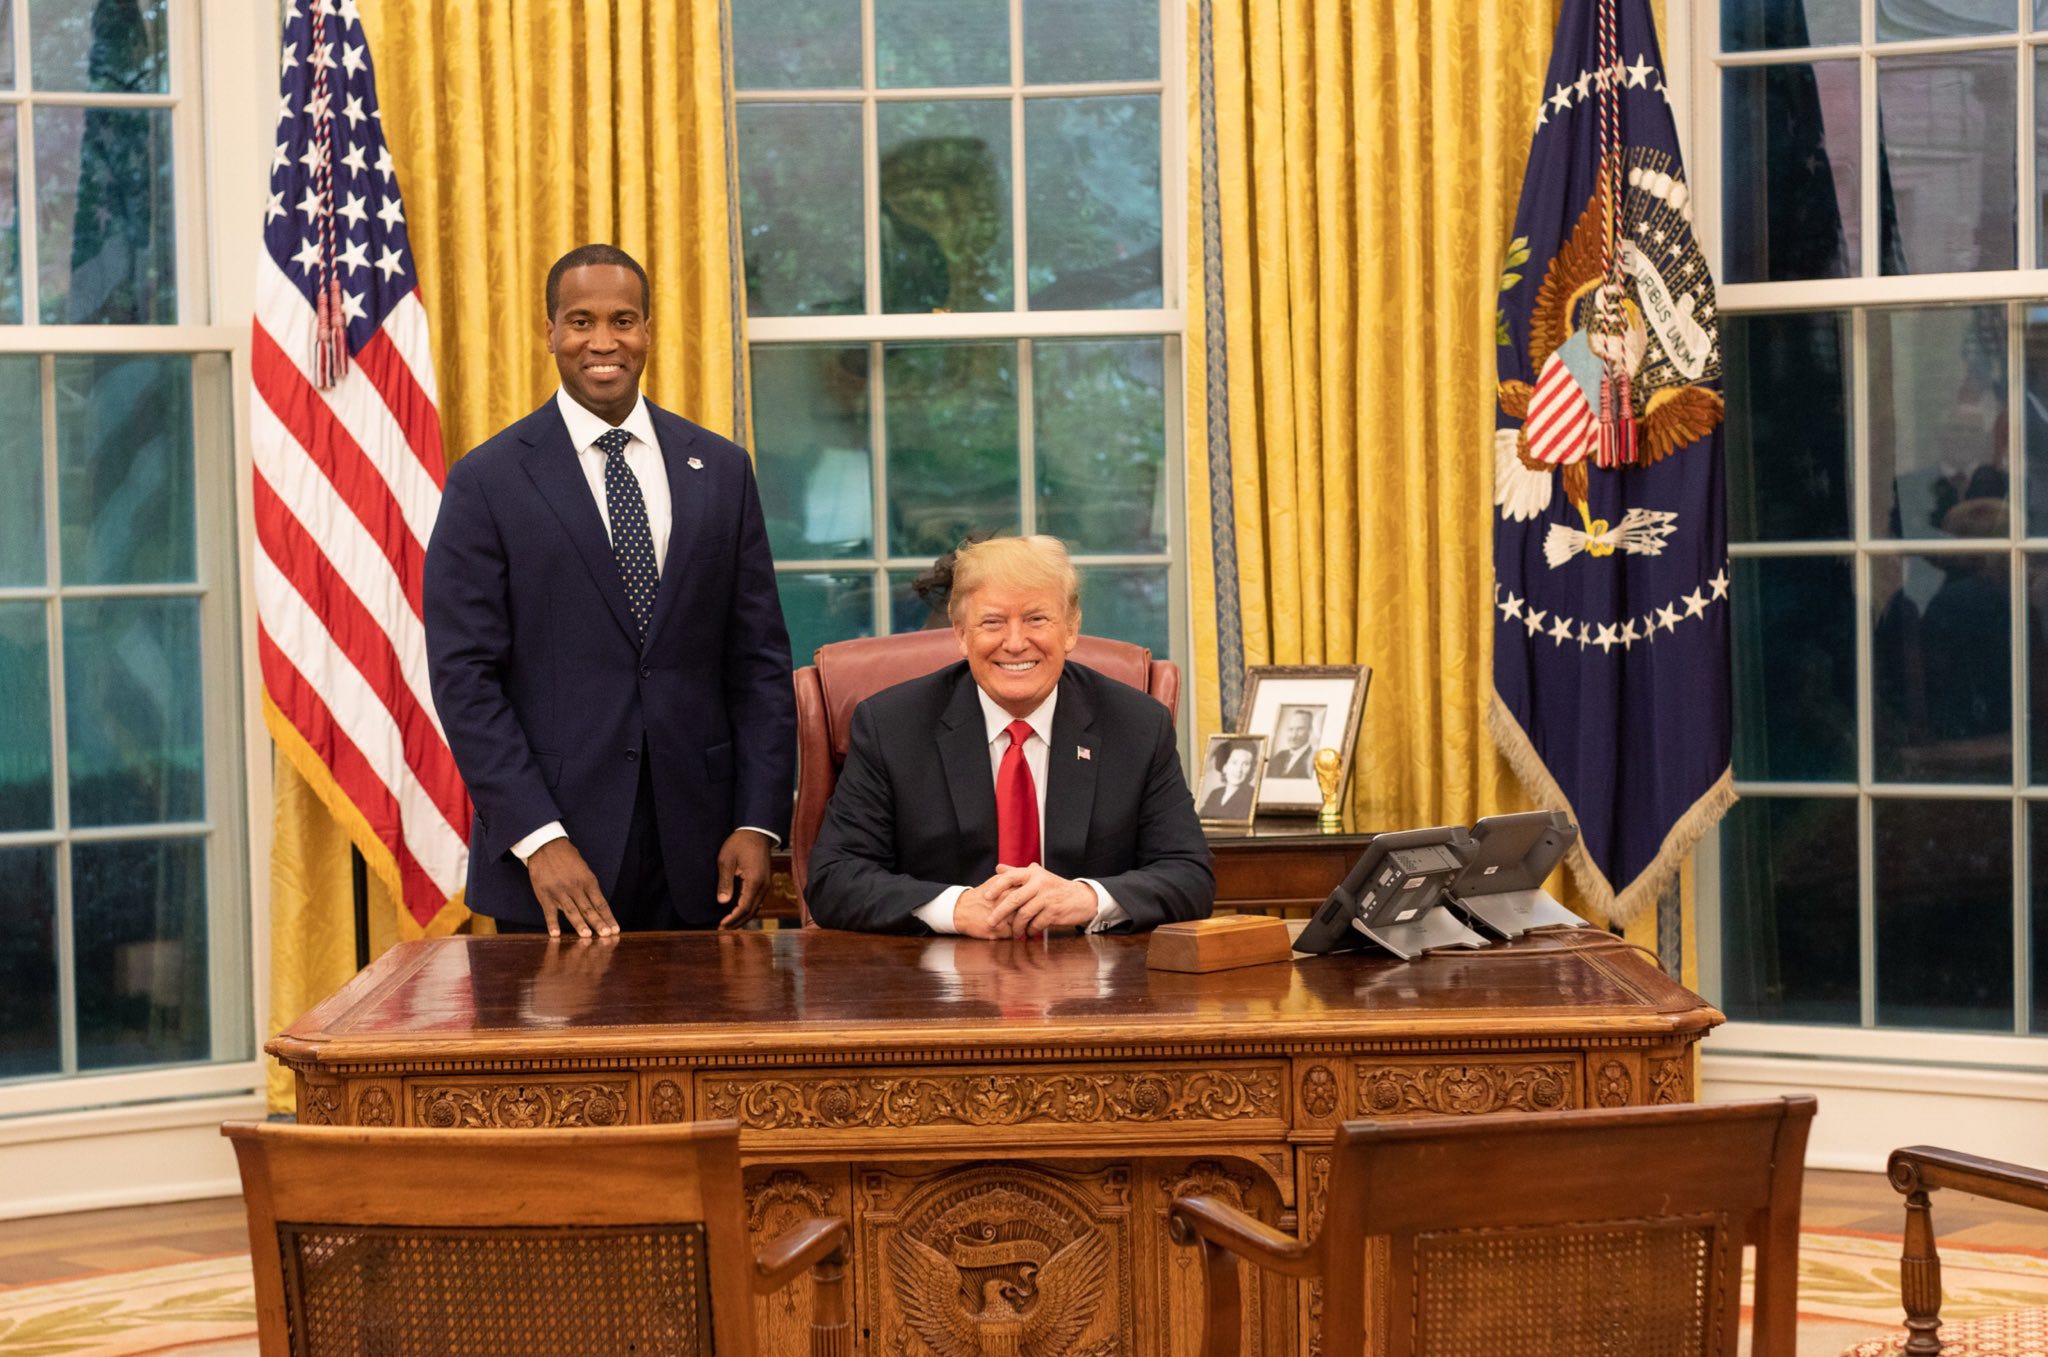 John James visited with President Donald Trump in the White House on Sept. 17, 2018.